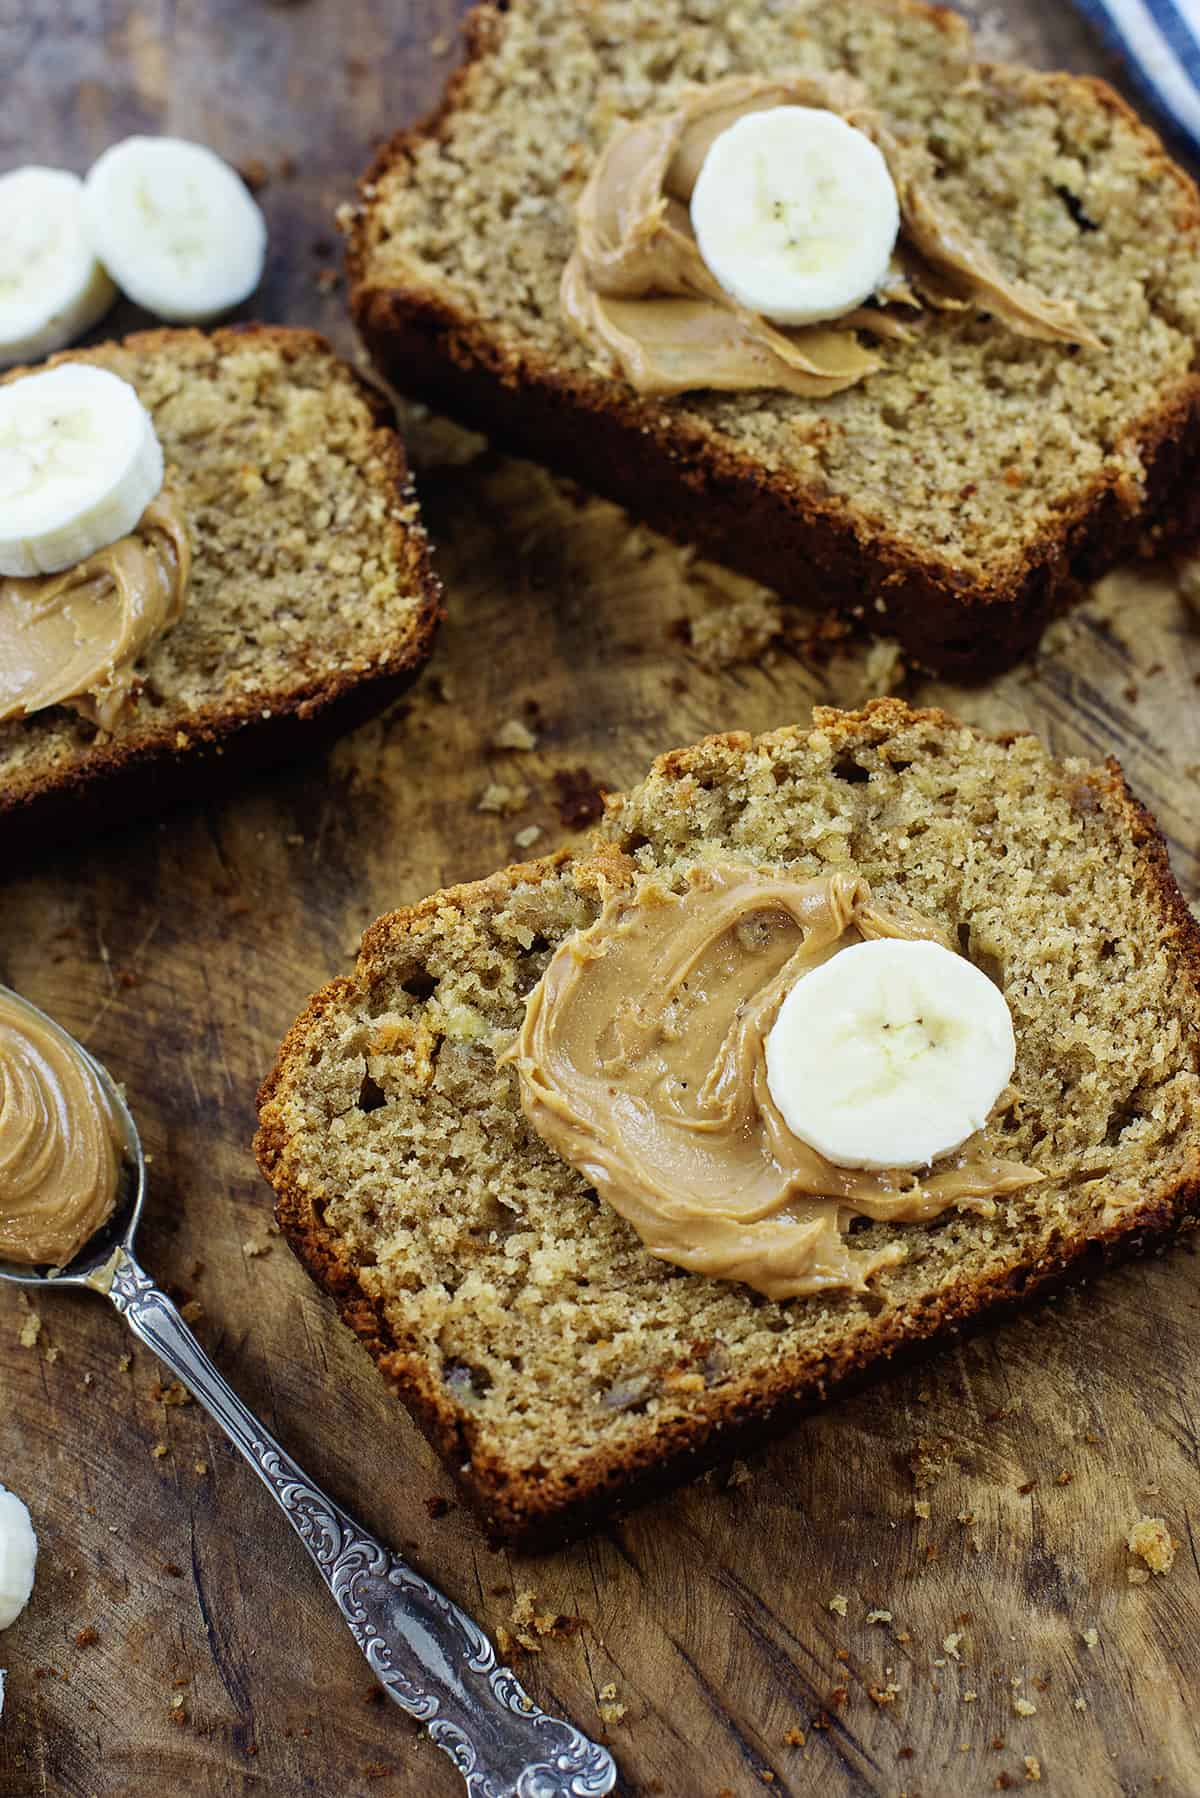 Slices of banana bread with peanut butter and banana on top.